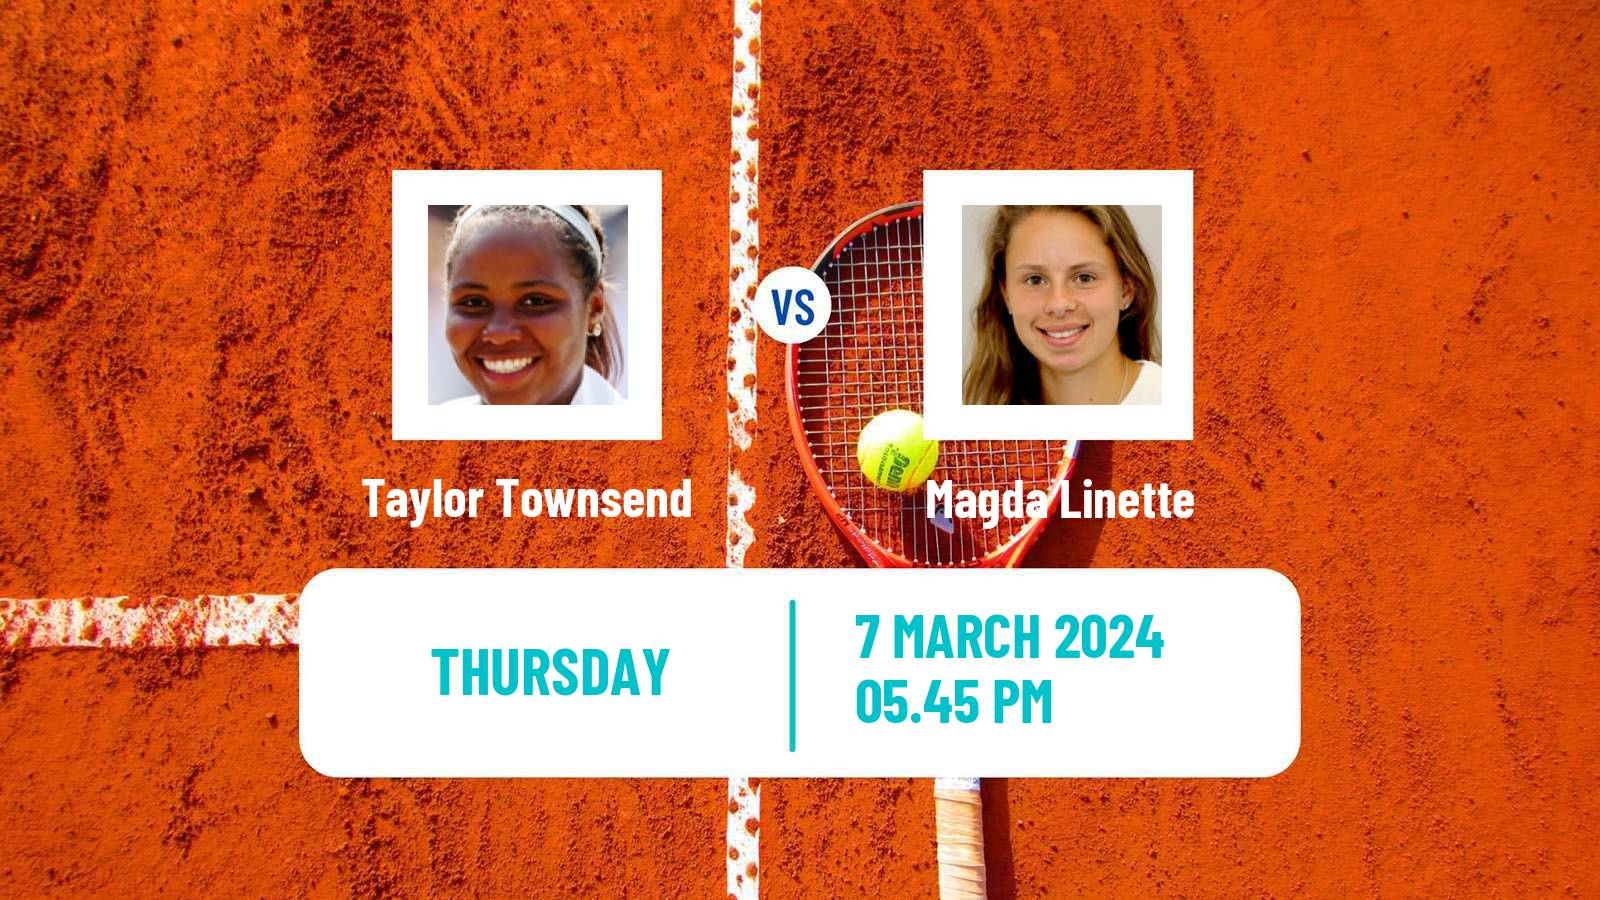 Tennis WTA Indian Wells Taylor Townsend - Magda Linette